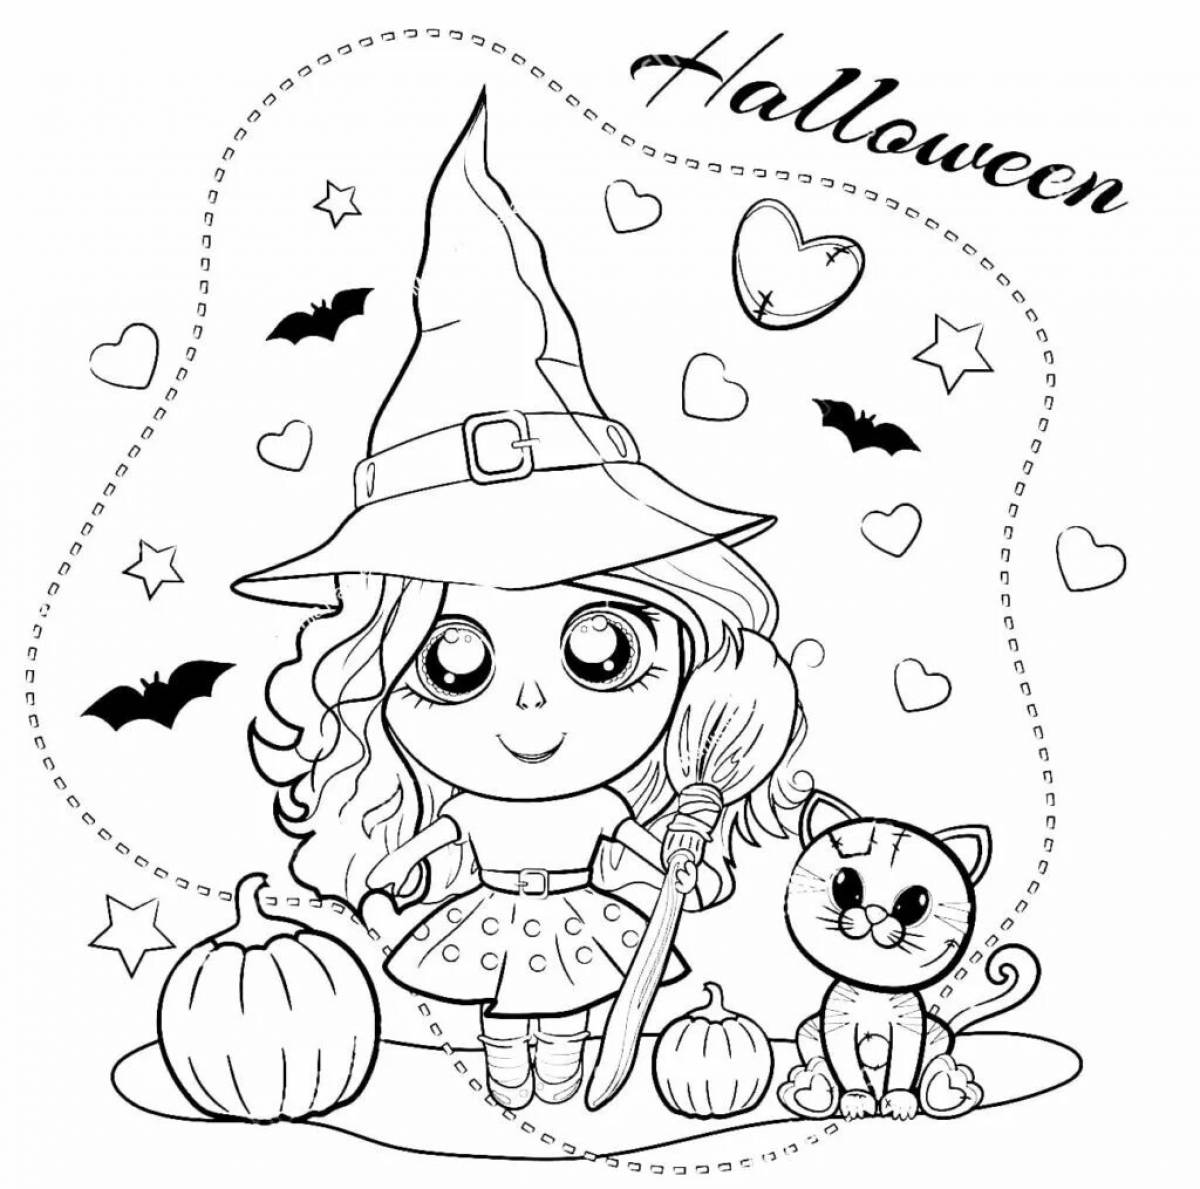 Dreamy ai and witch coloring book